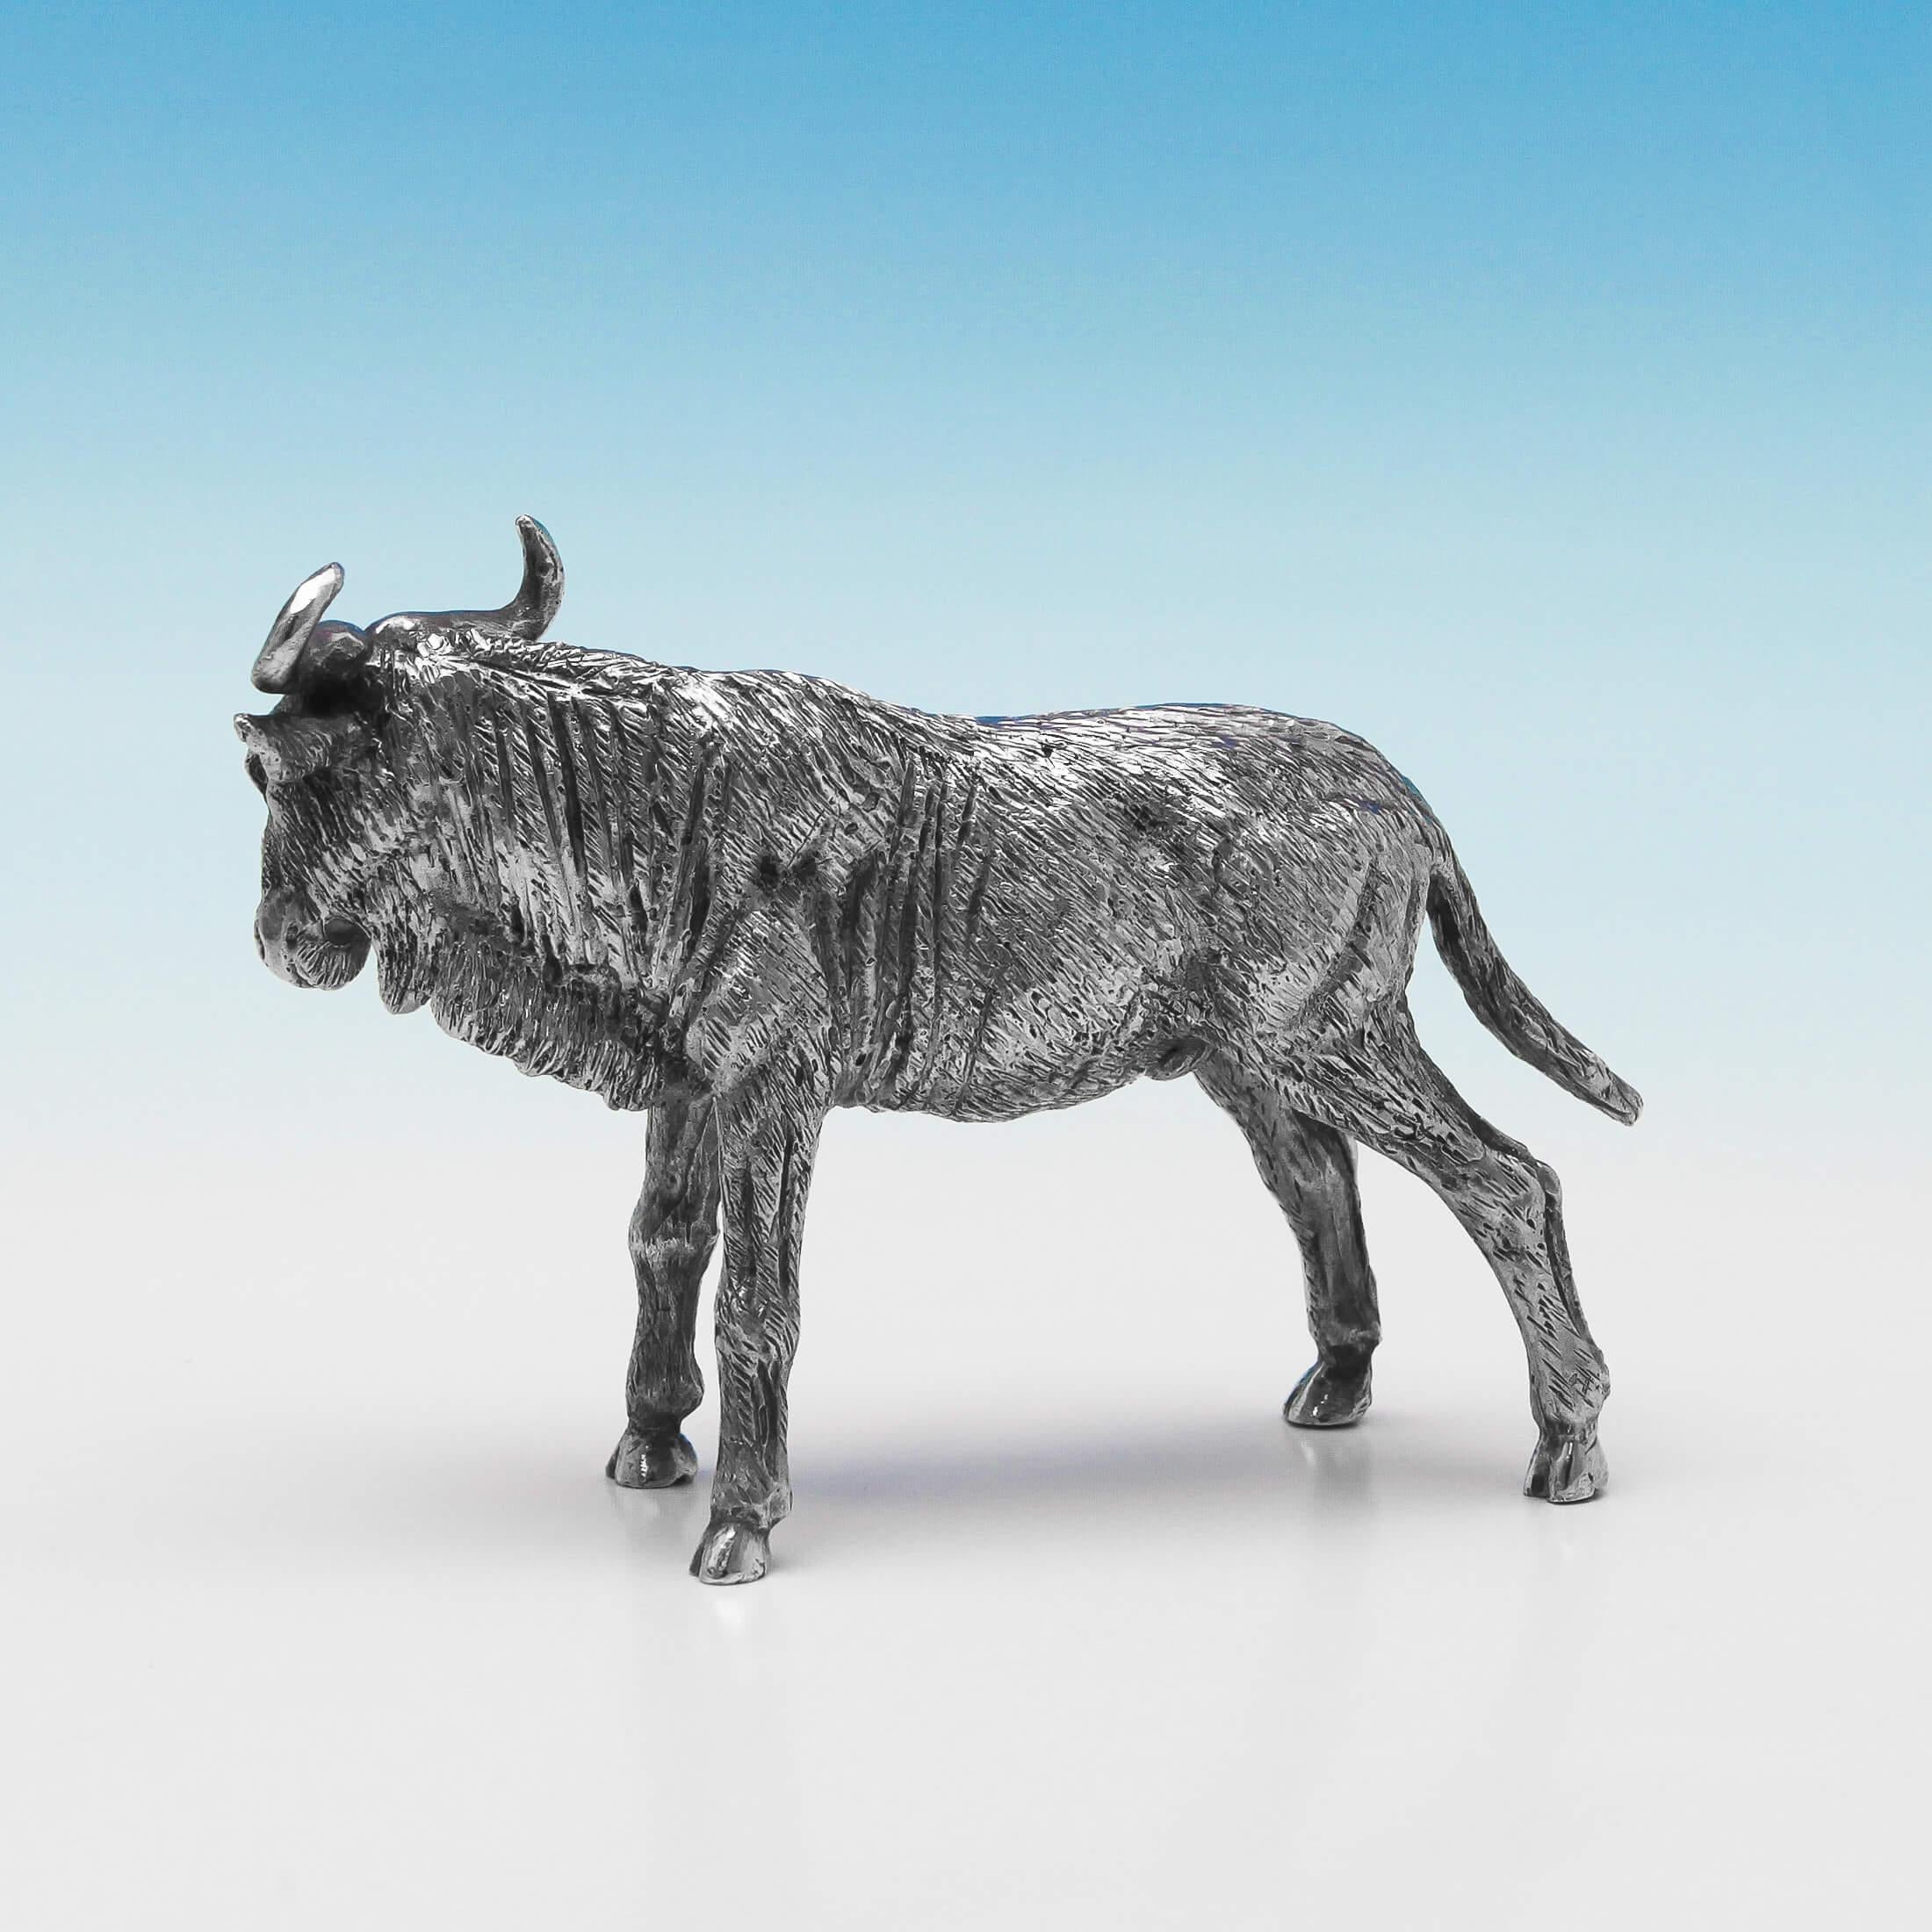 Hallmarked in London, in 2003, this handsome, sterling silver model of a wildebeest, is realistically cast, and measures: 3 inches (7.5cm) tall, by 4.75 inches (12cm) from nose to tail. The wildebeest (or gnu) weighs 14.2 troy ounces.
  